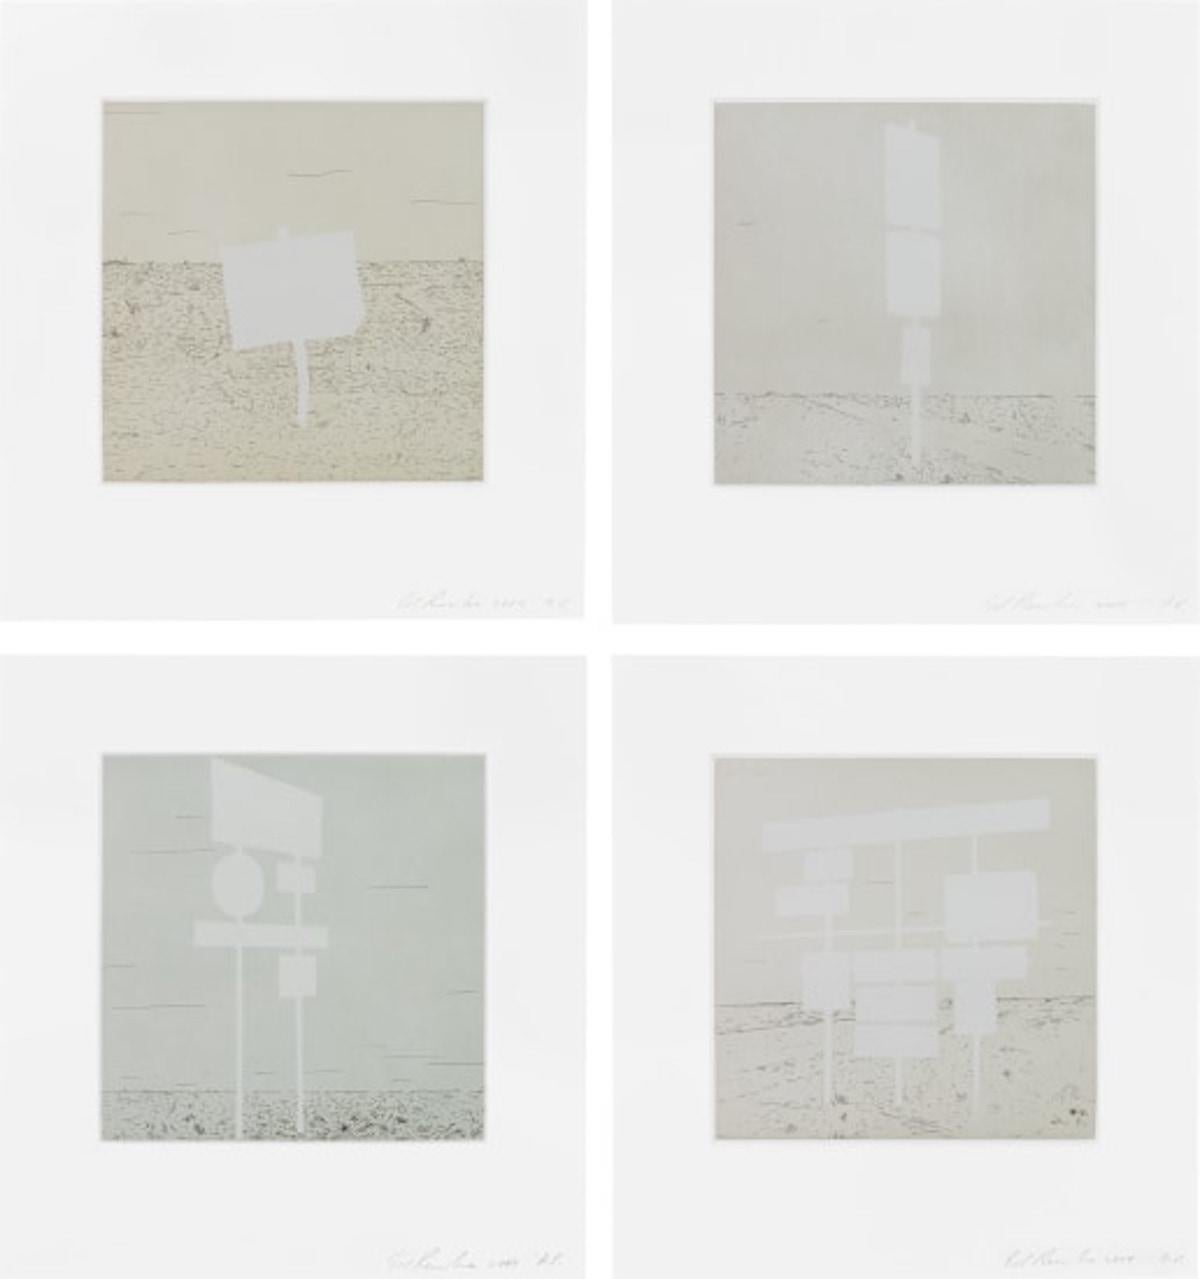 ED RUSCHA (1937-Present)

This piece 'Blank Signs' is the complete set of four etching and aquatints in colors on Magnani Pescia paper, with full margins, conceived in 2004. Each print is signed, dated, and annotated 'A.P.' in pencil (one of 5